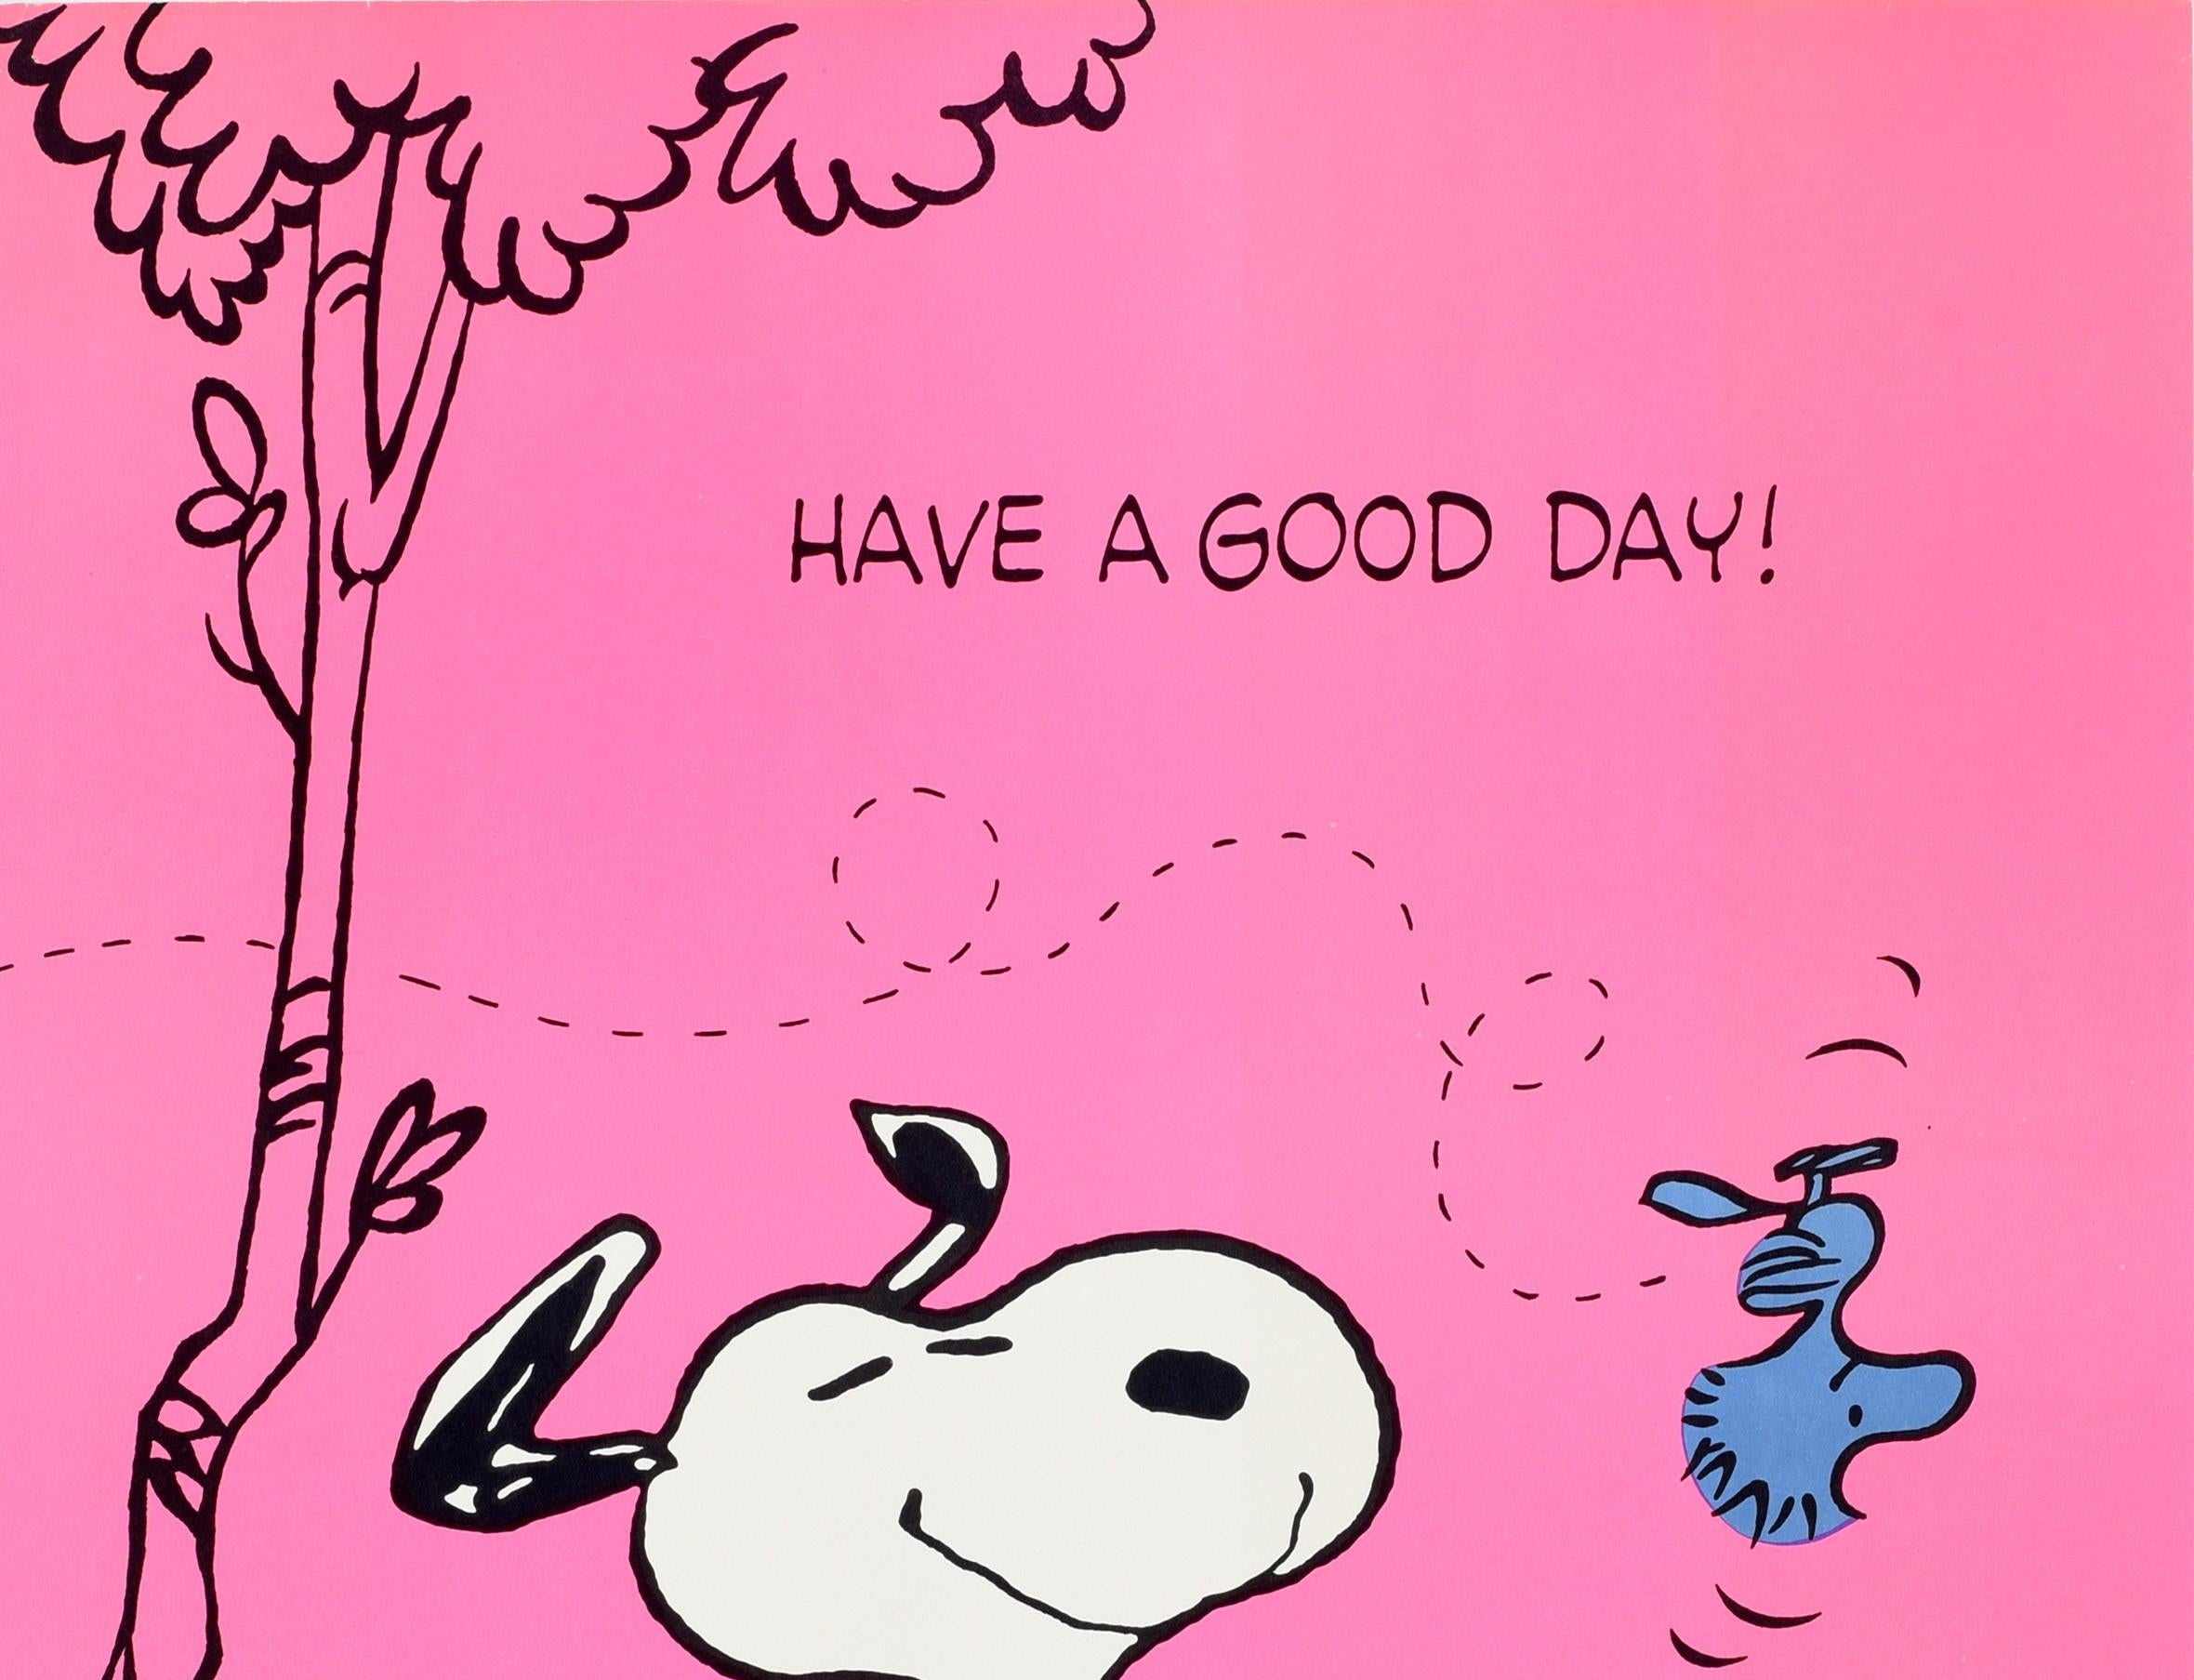 Original Vintage Snoopy Poster Have A Good Day Cartoon Art Dog Woodstock Bird - Print by Charles M. Schulz